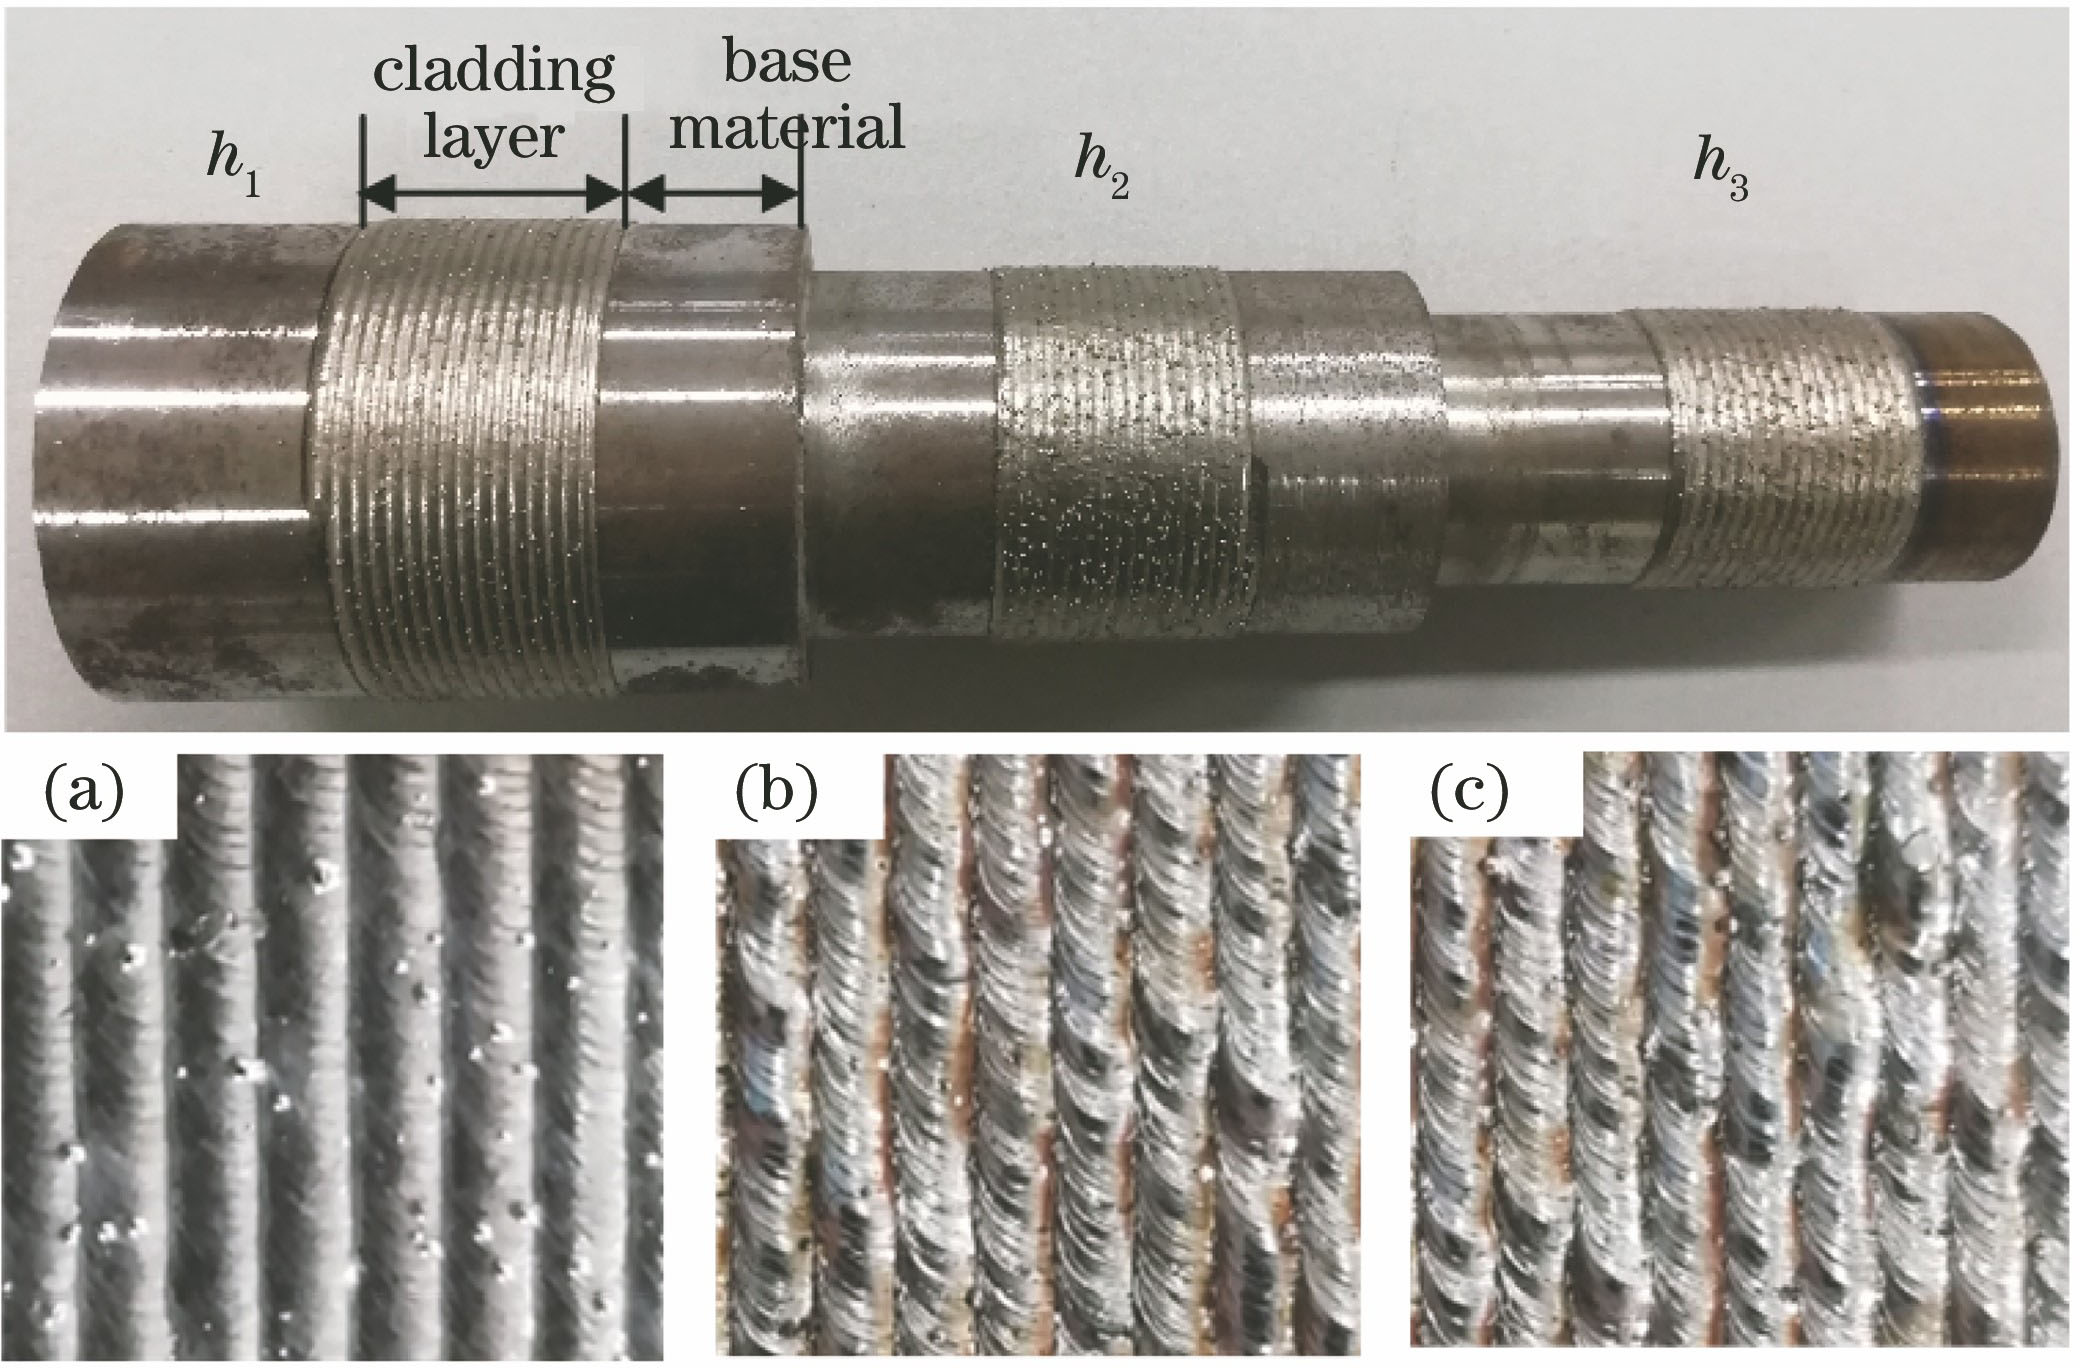 Surface macromorphology of cladding layer with different defocusing amounts. (a) 8 mm; (b) 10 mm; (c) 12 mm